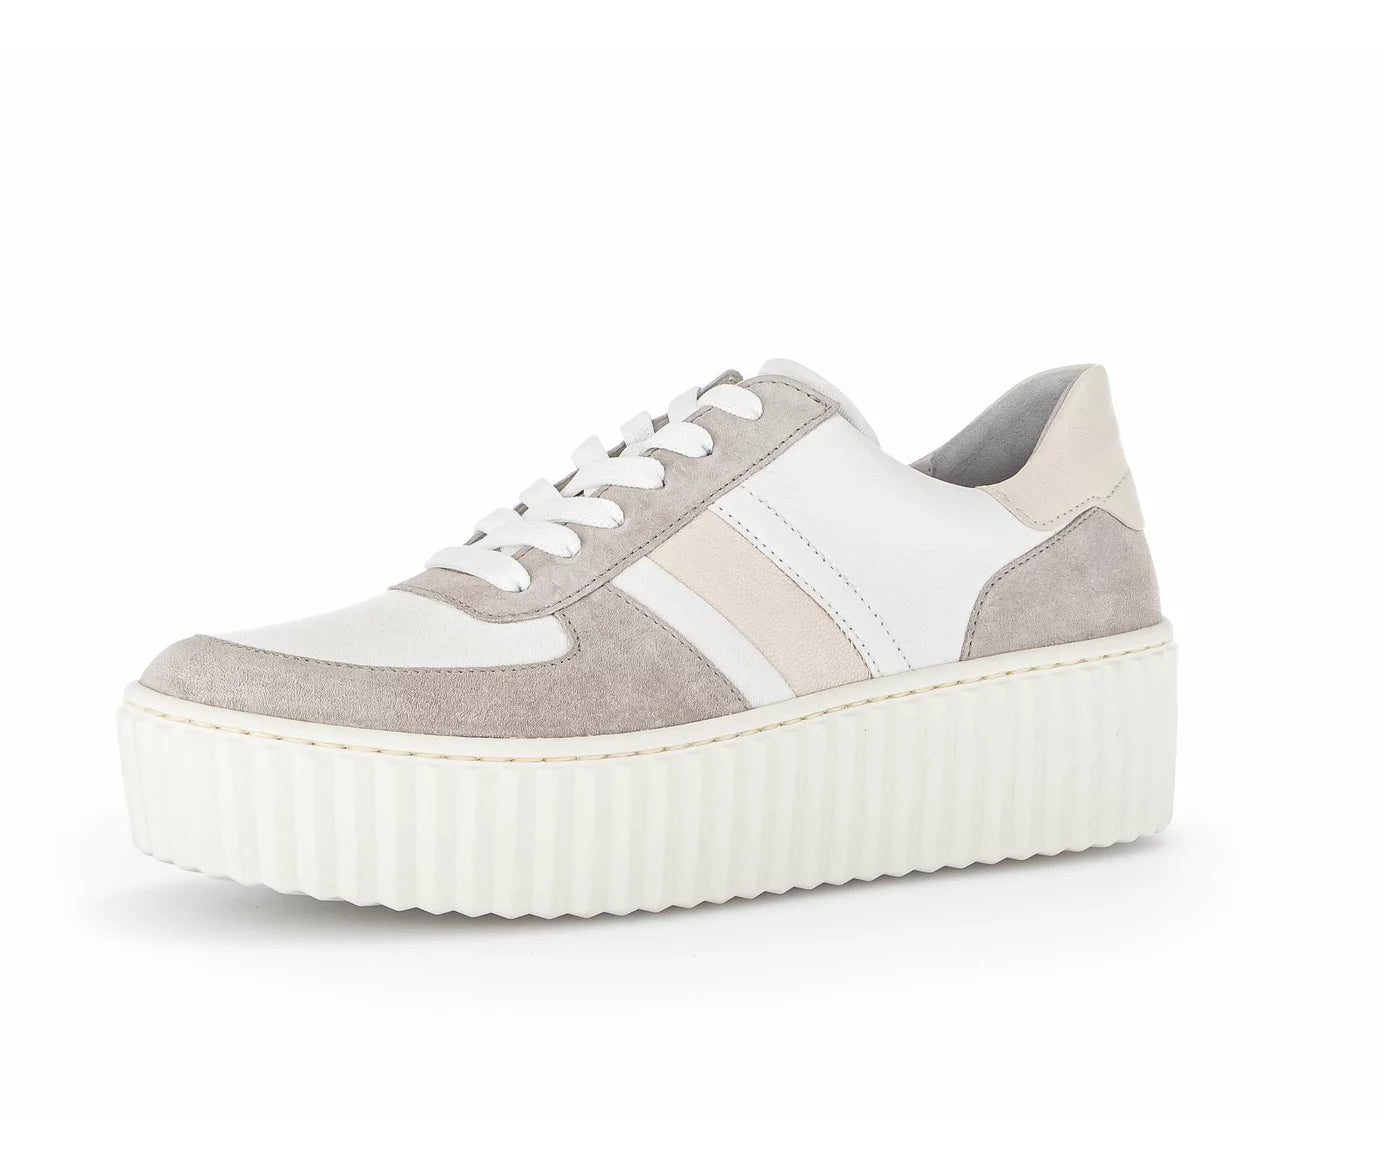 Double Zip Platform Sneakers in White Leather by Gabor 23.200.21 - For The  Love of Shoes NY